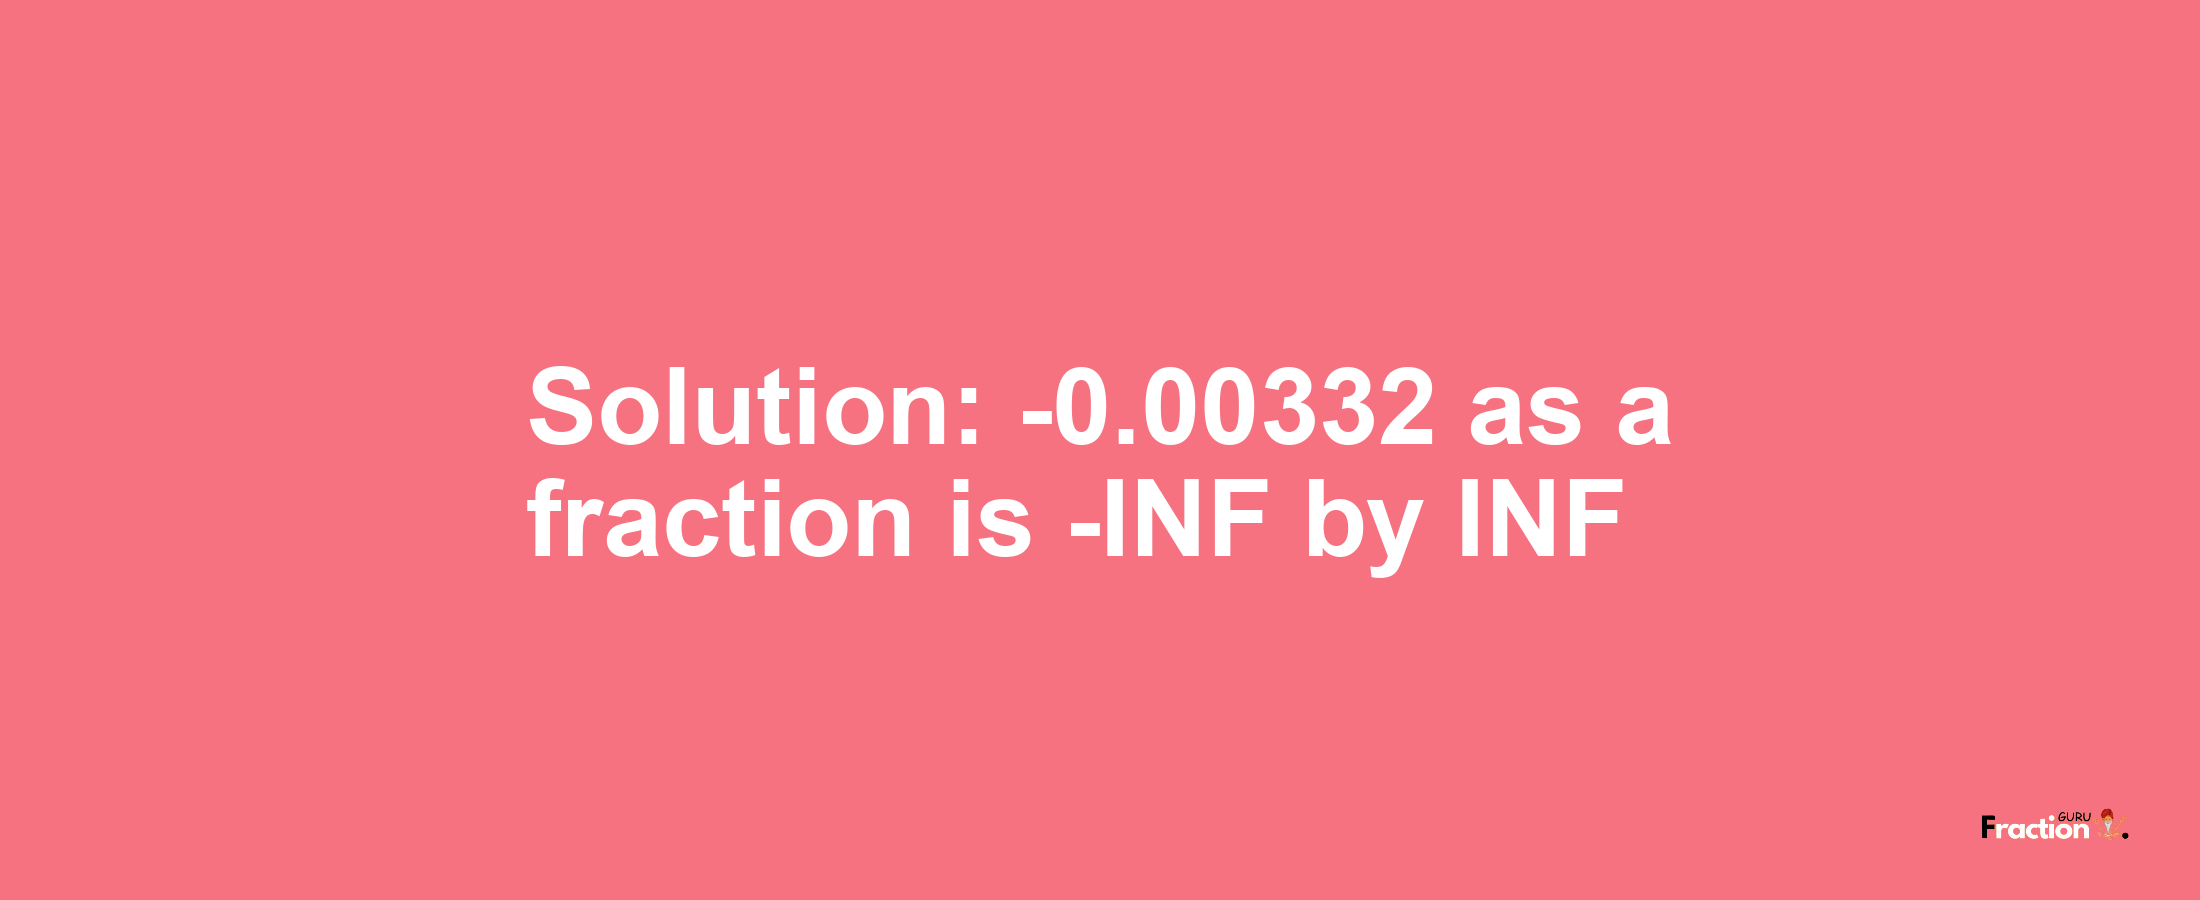 Solution:-0.00332 as a fraction is -INF/INF